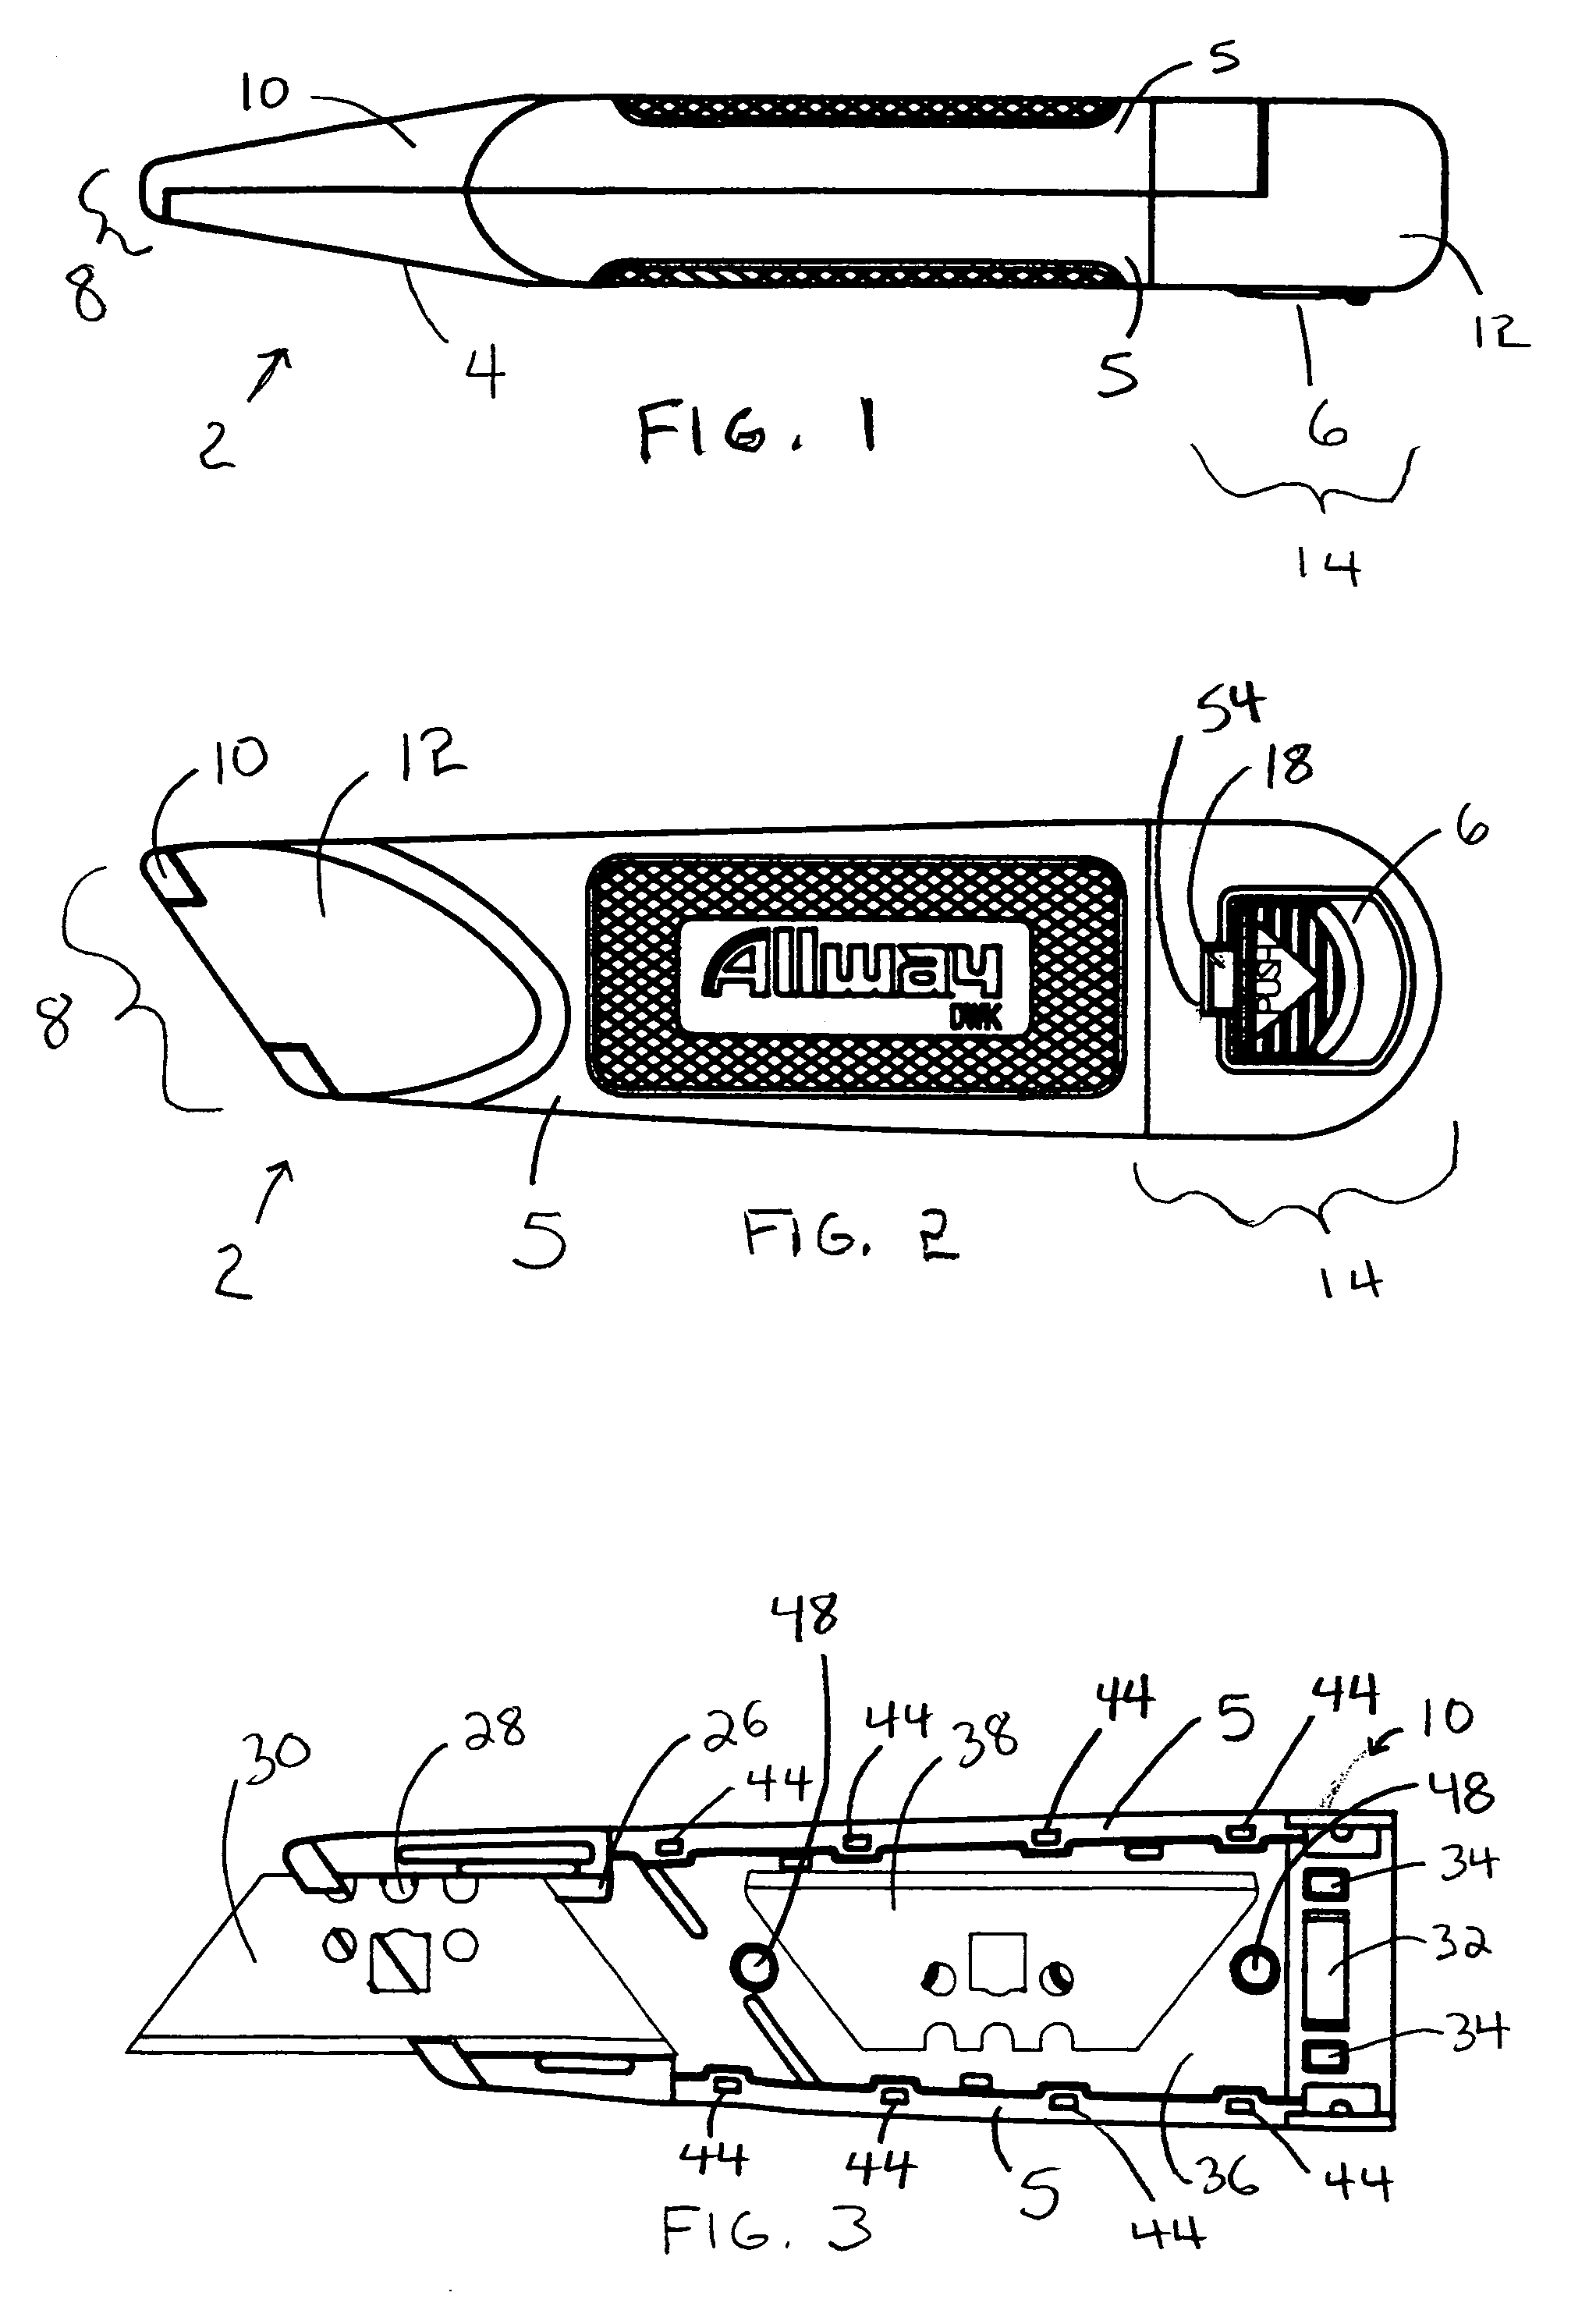 Soft handle non-retractable utility knife with quick release latch and method for making same